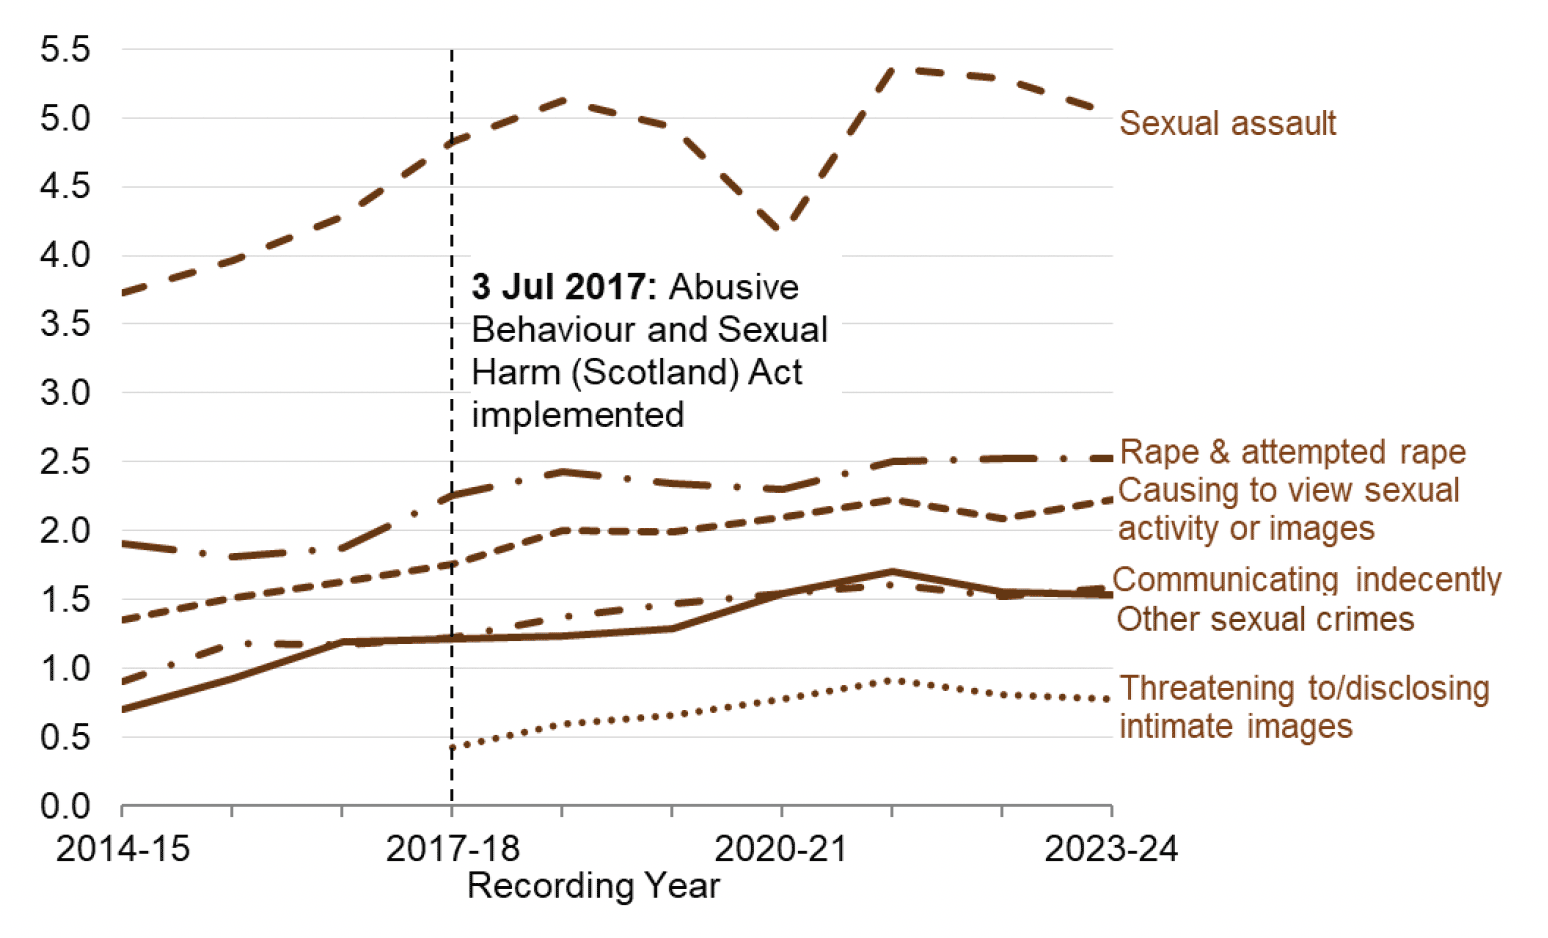 A line chart showing that the levels of Sexual assault have consistently shown the highest level of Sexual crimes over the last ten years and have been significantly higher than the other categories. They generally increased but dipped in 2020-21 though still remained higher than in 2014-15.